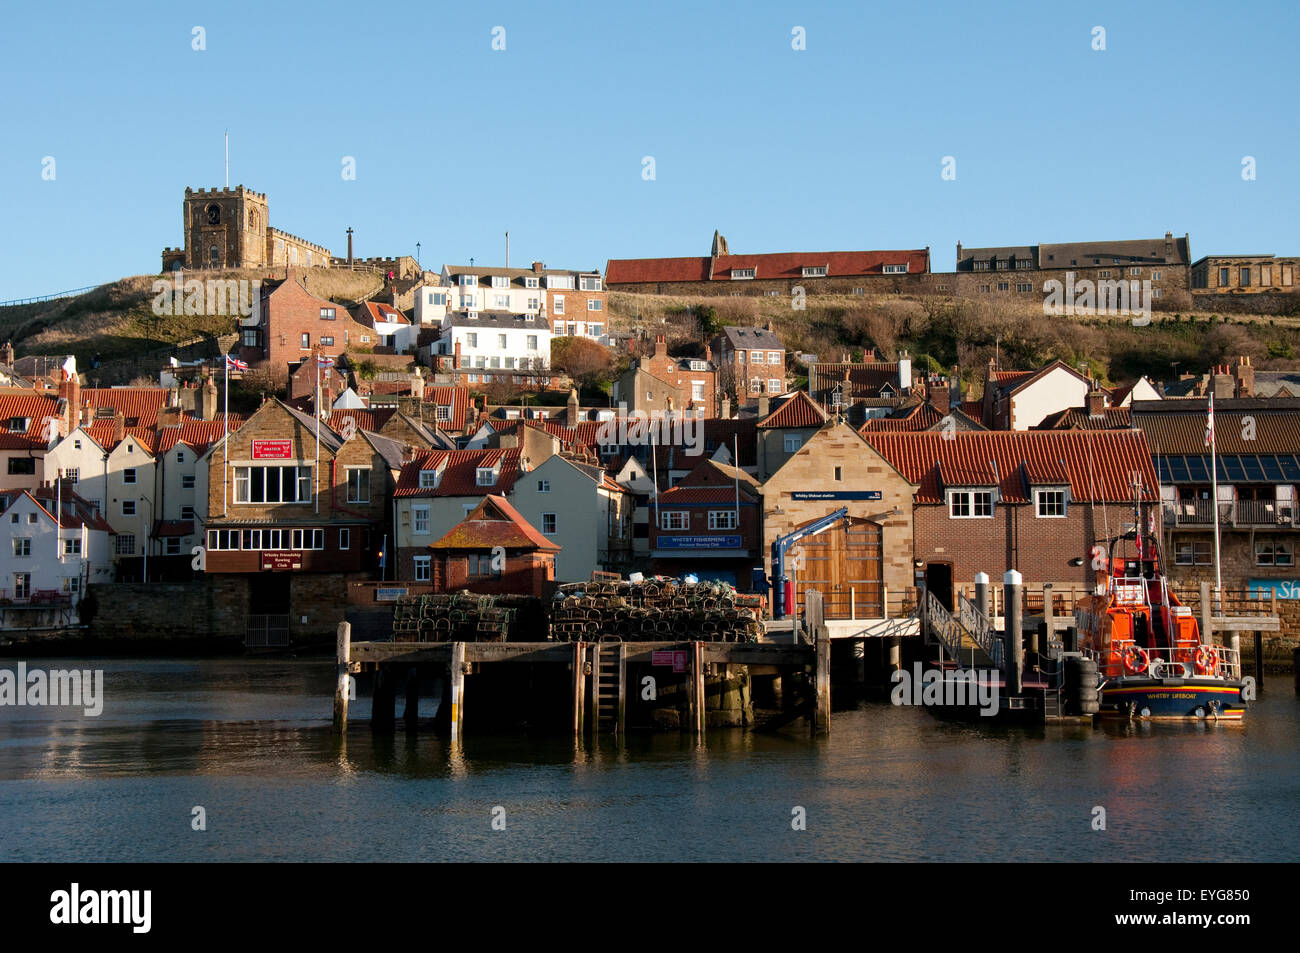 Whitby, North Yorkshire Angleterre UK Banque D'Images